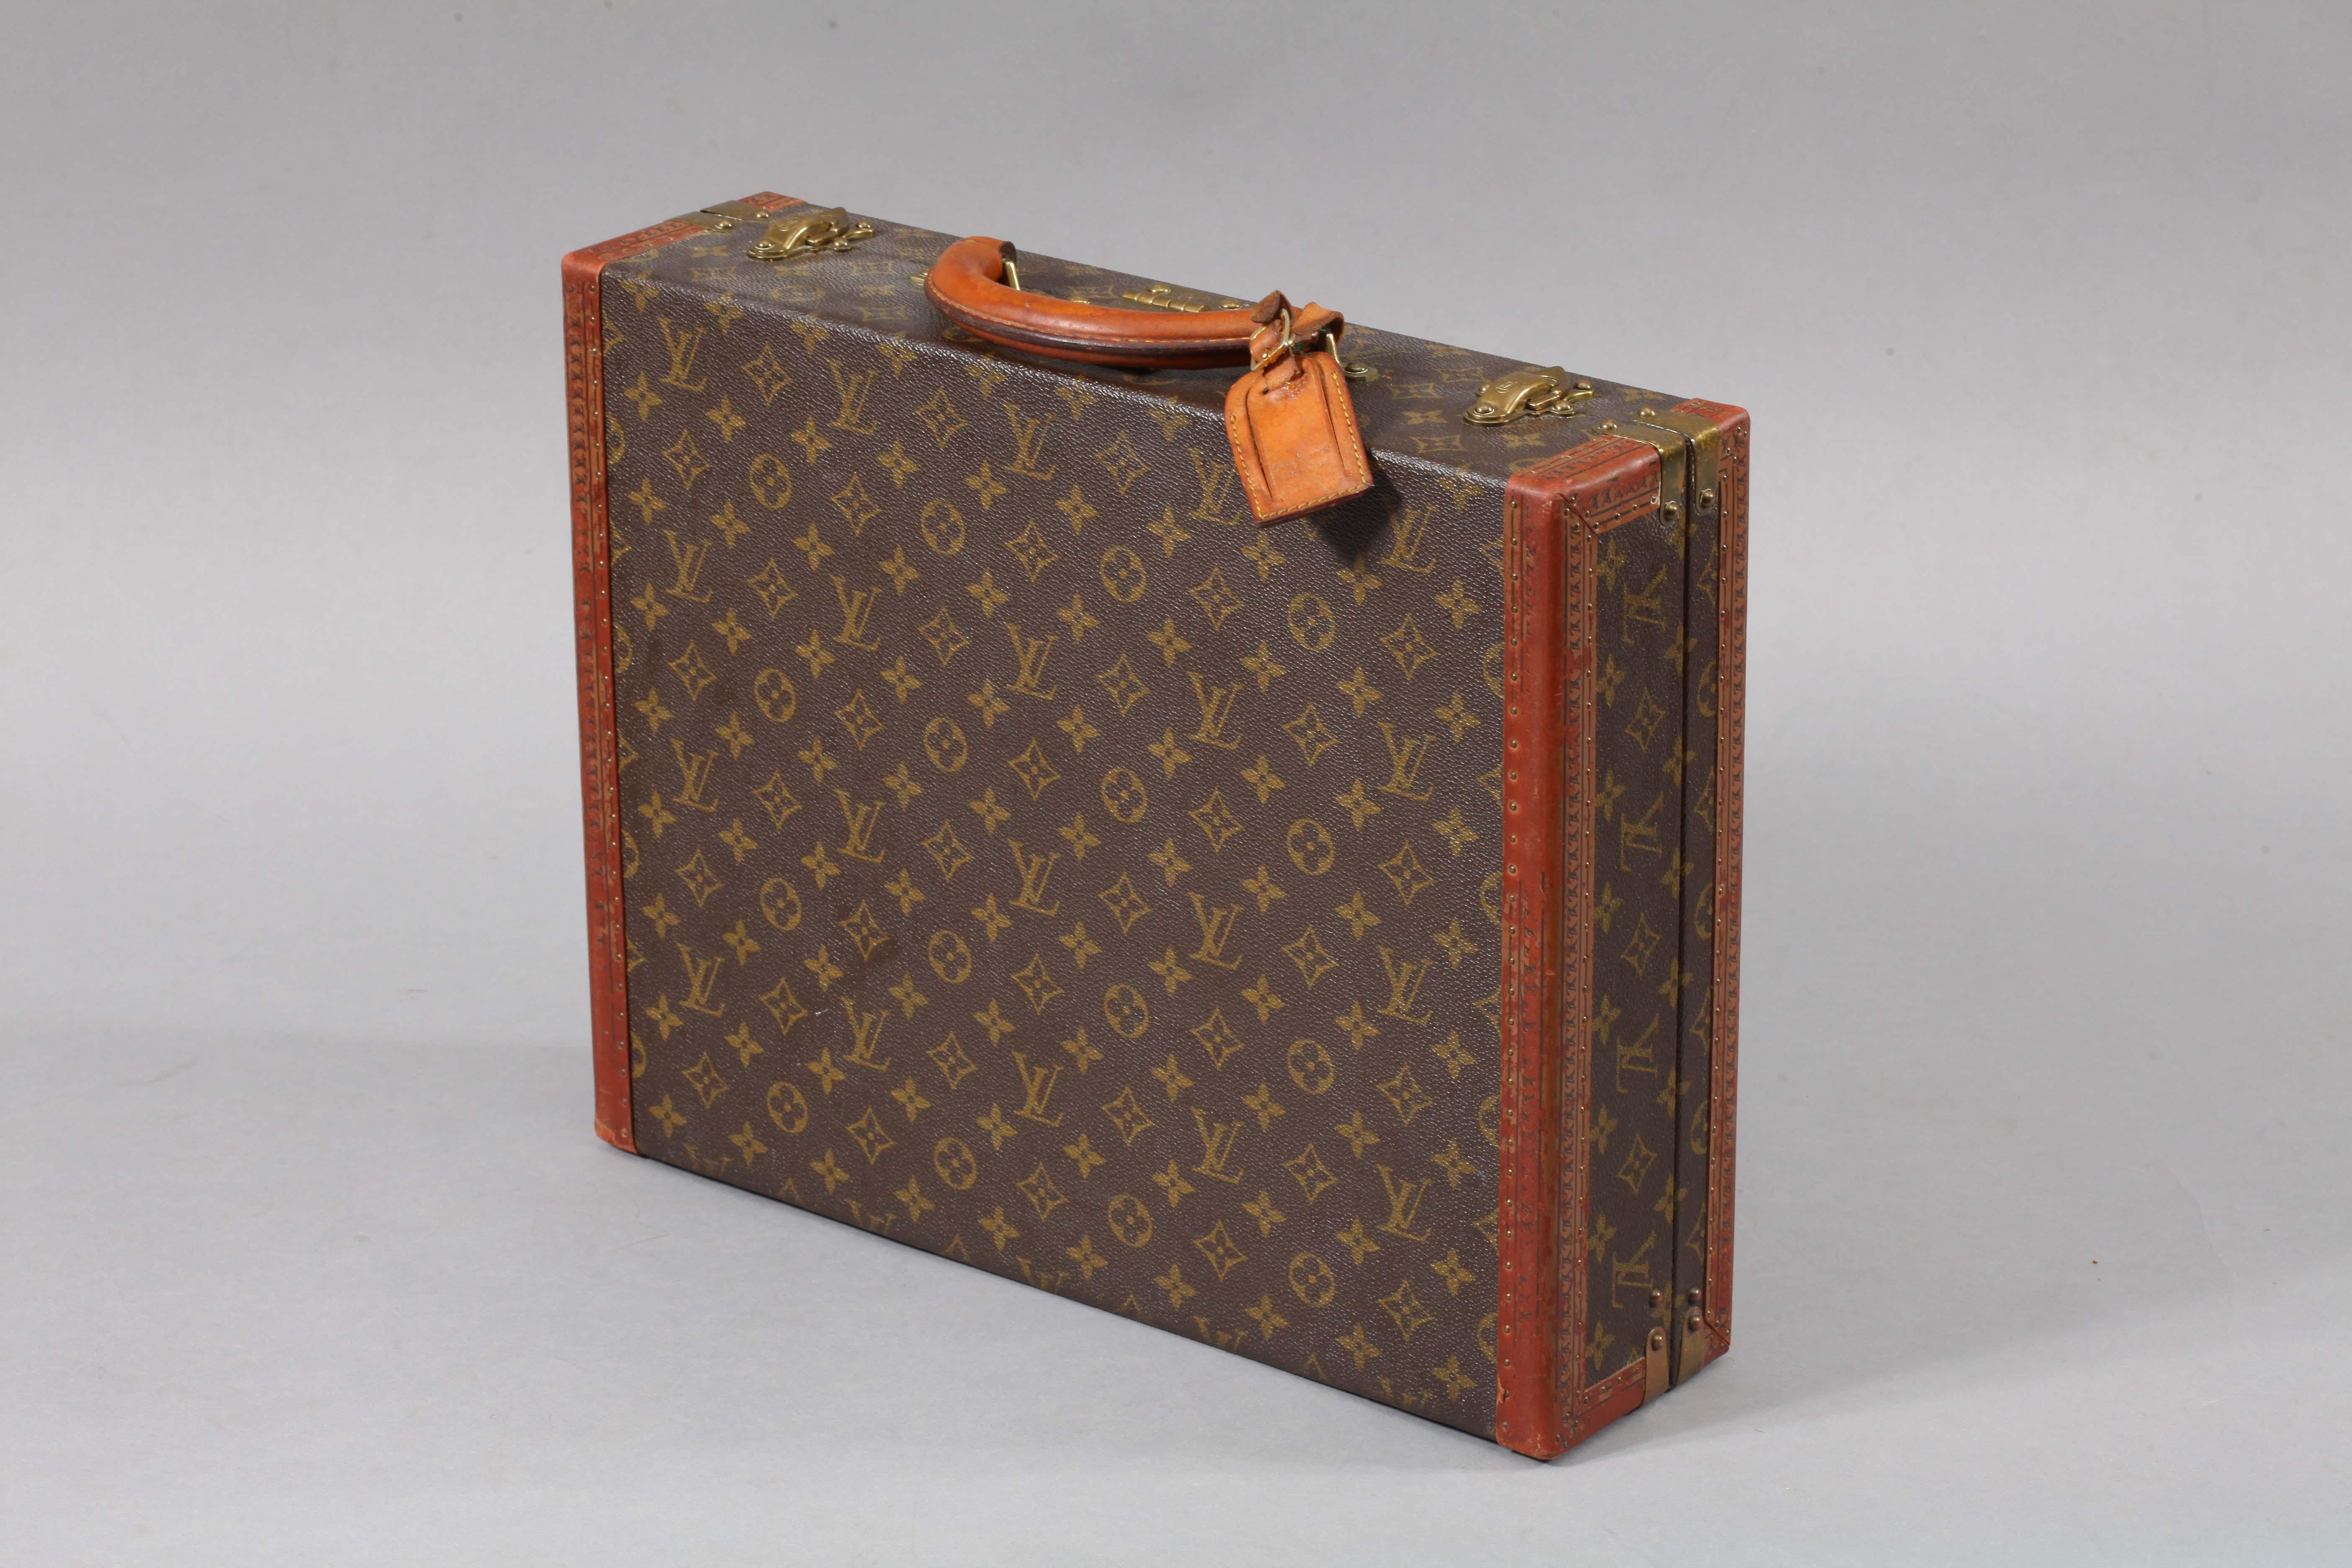 Louis Vuitton 'President' in LV monogram pattern with brass fittings and trimmed with lozine to the edges. The lid of the case is secured by a central sprung catch with lock as well as two latches. Brown leather lining to the interior and the inside